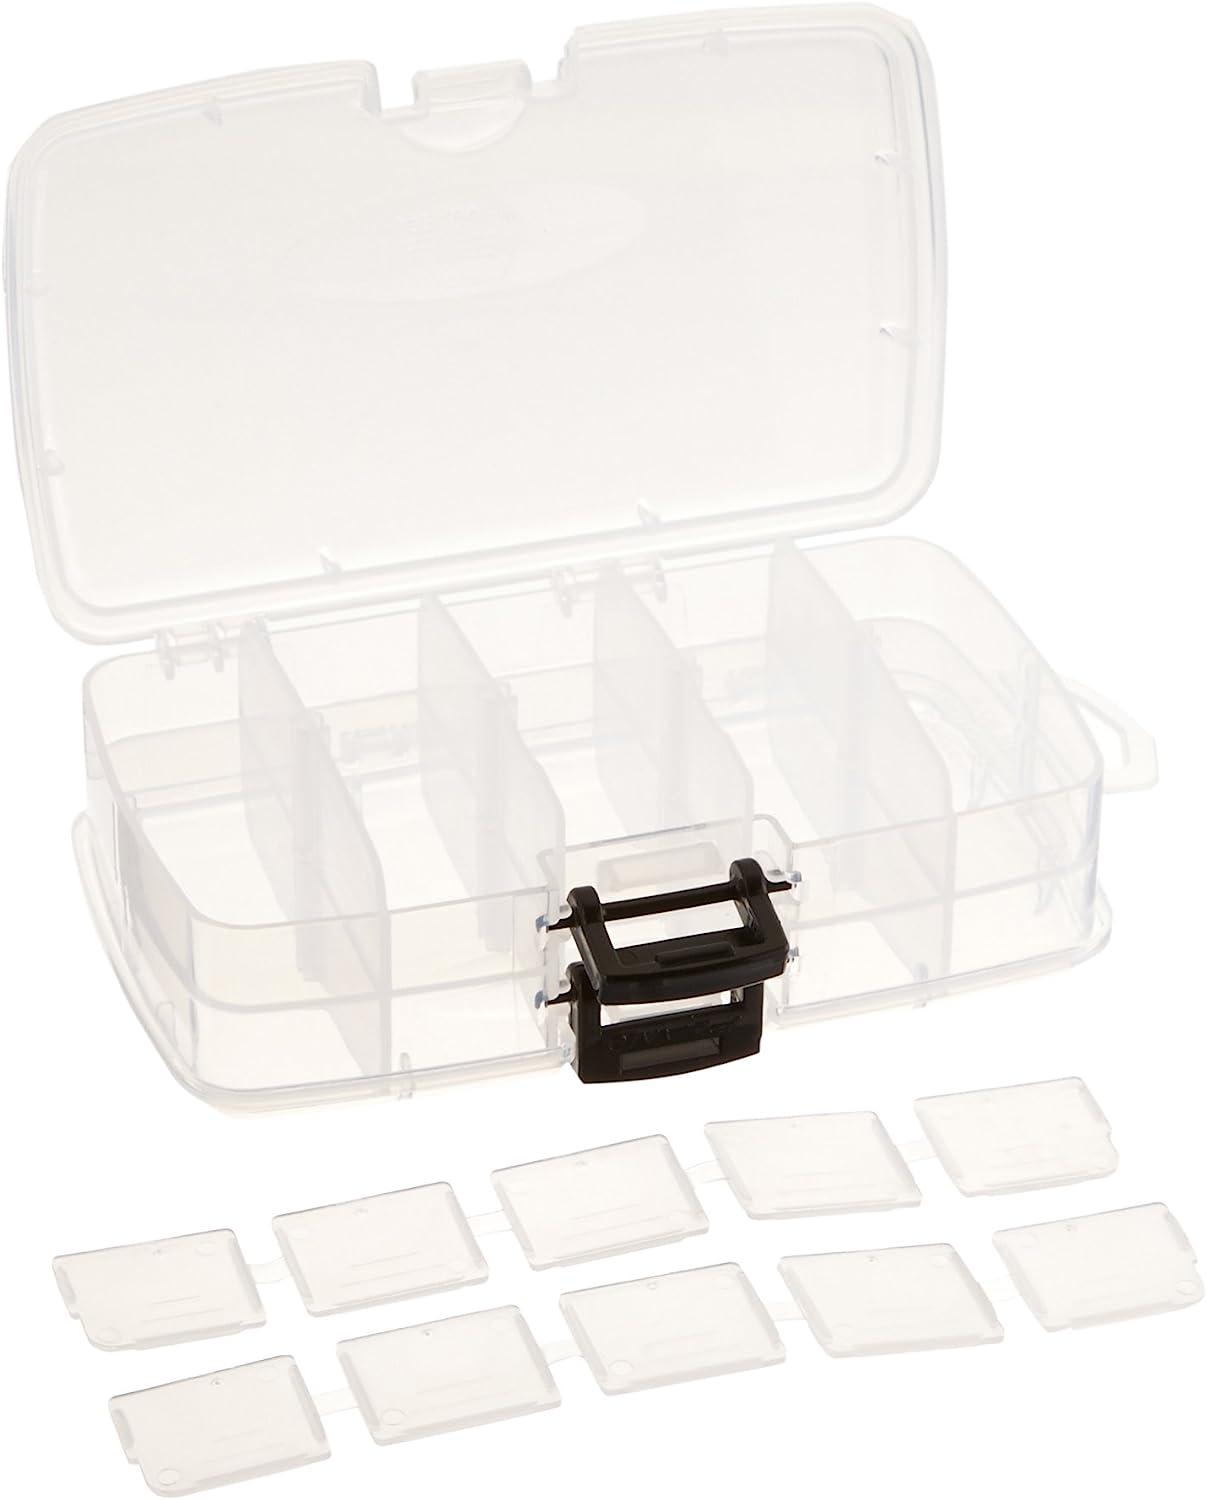 Plano Adjustable Double-Sided StowAway Tackle Box Premium Tackle